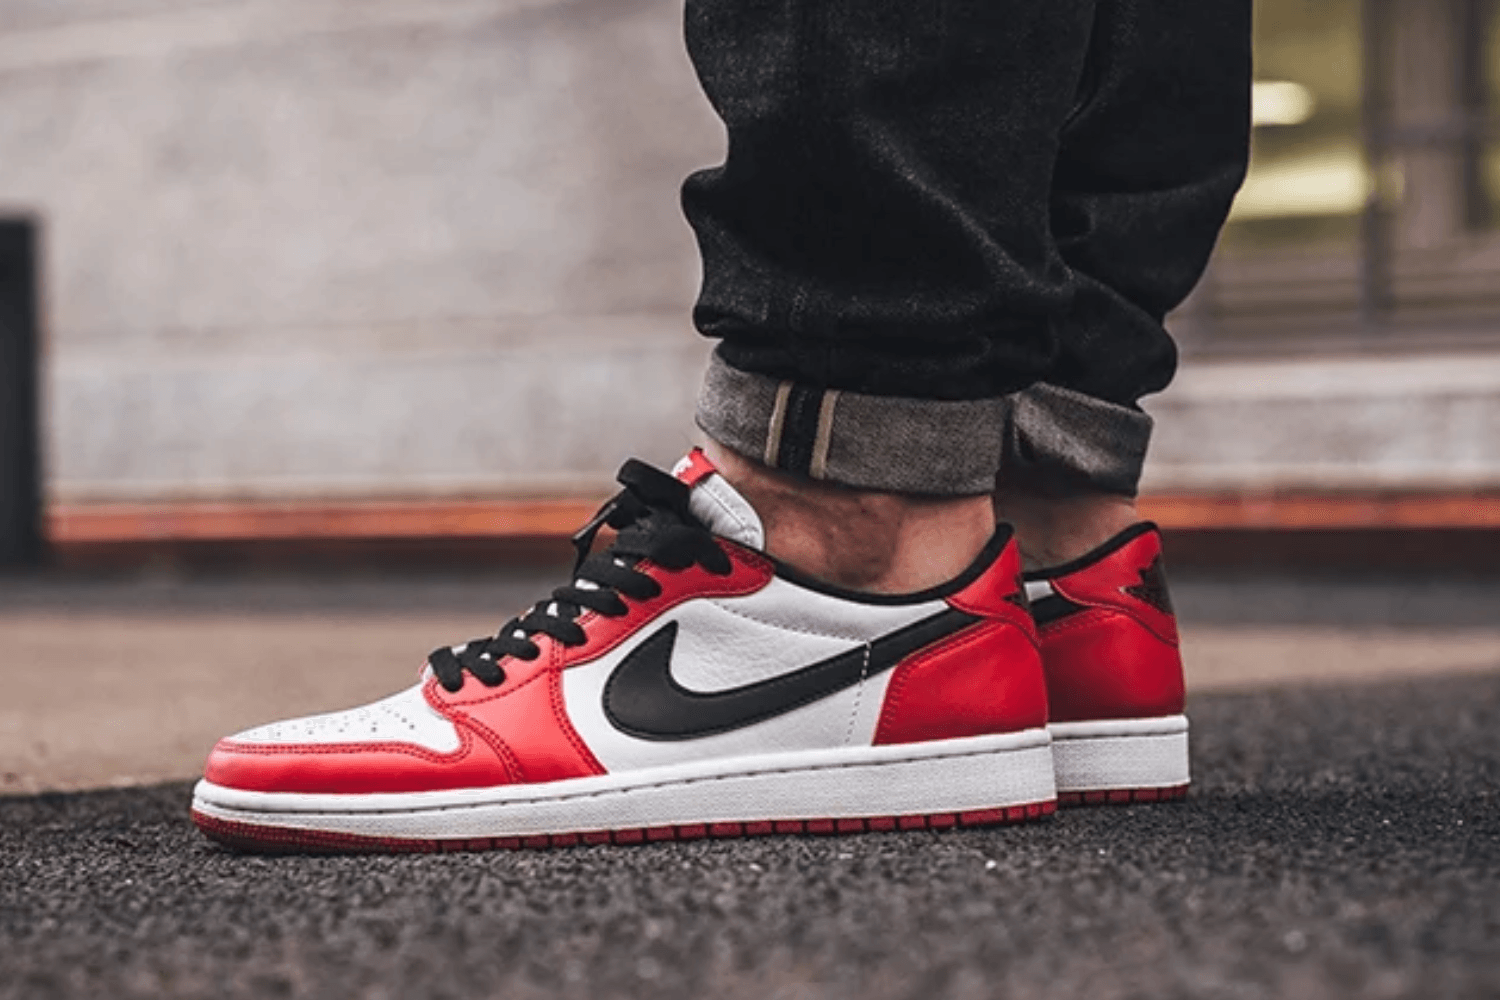 How to style the Air Jordan 1 Low